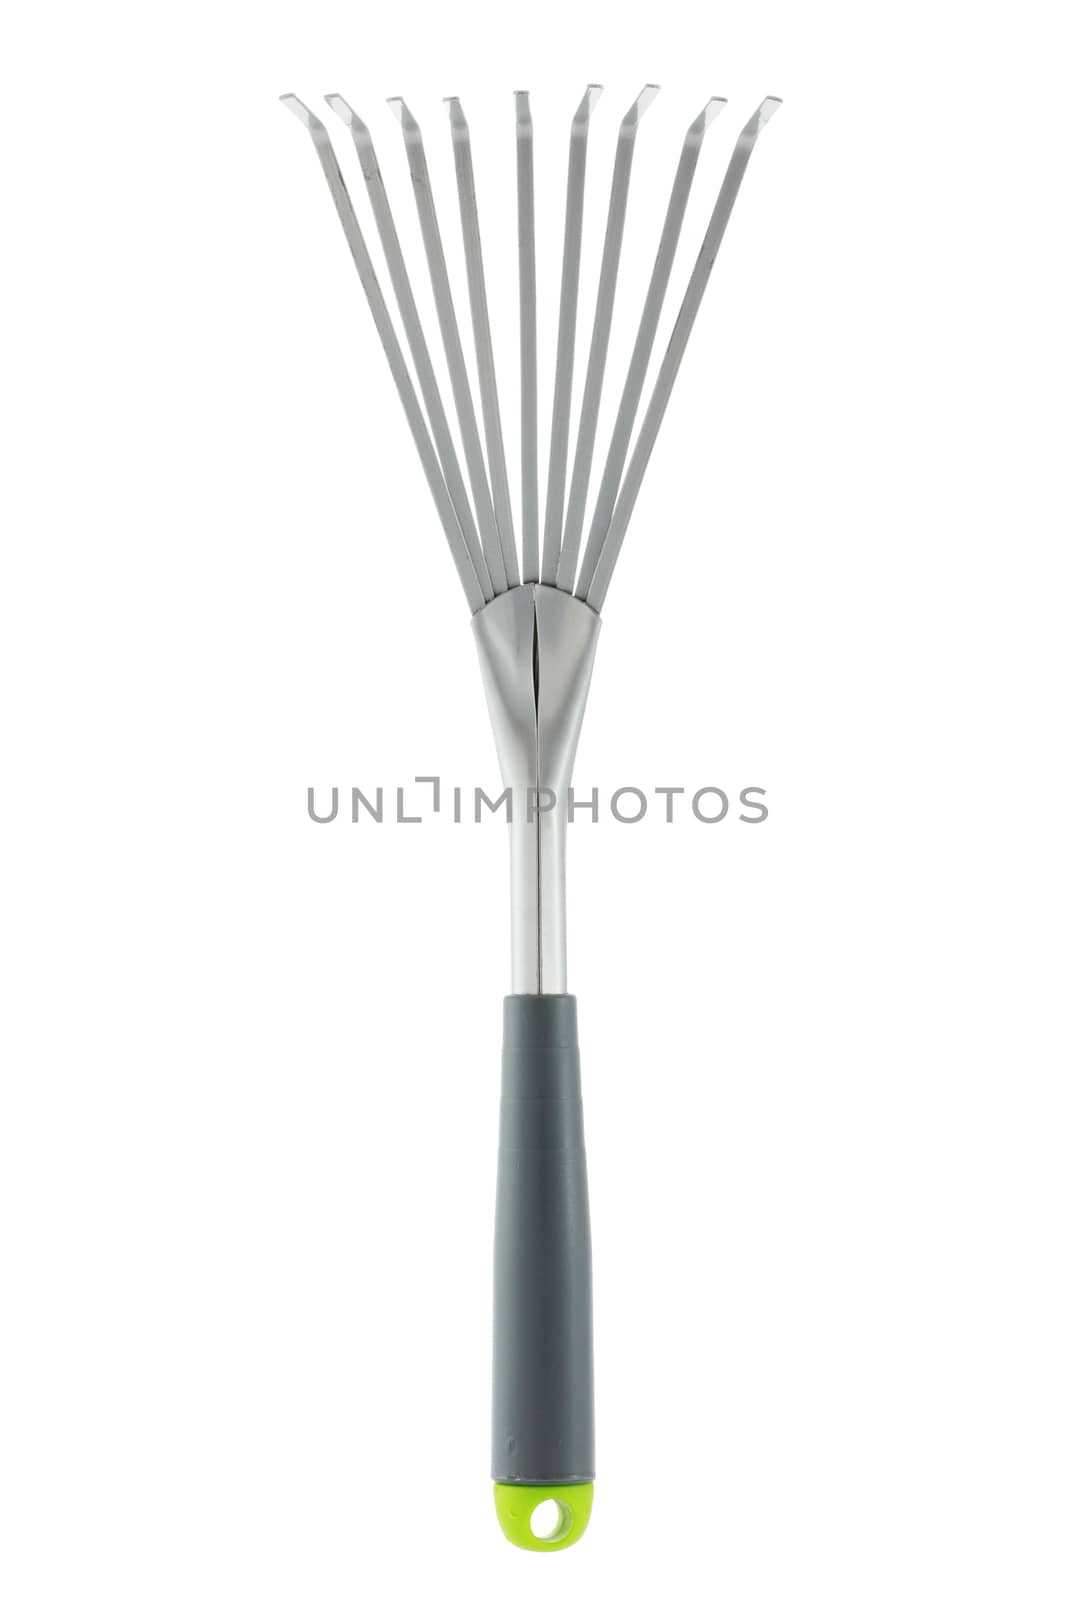 A hand rake for gardening on white background with clipping path